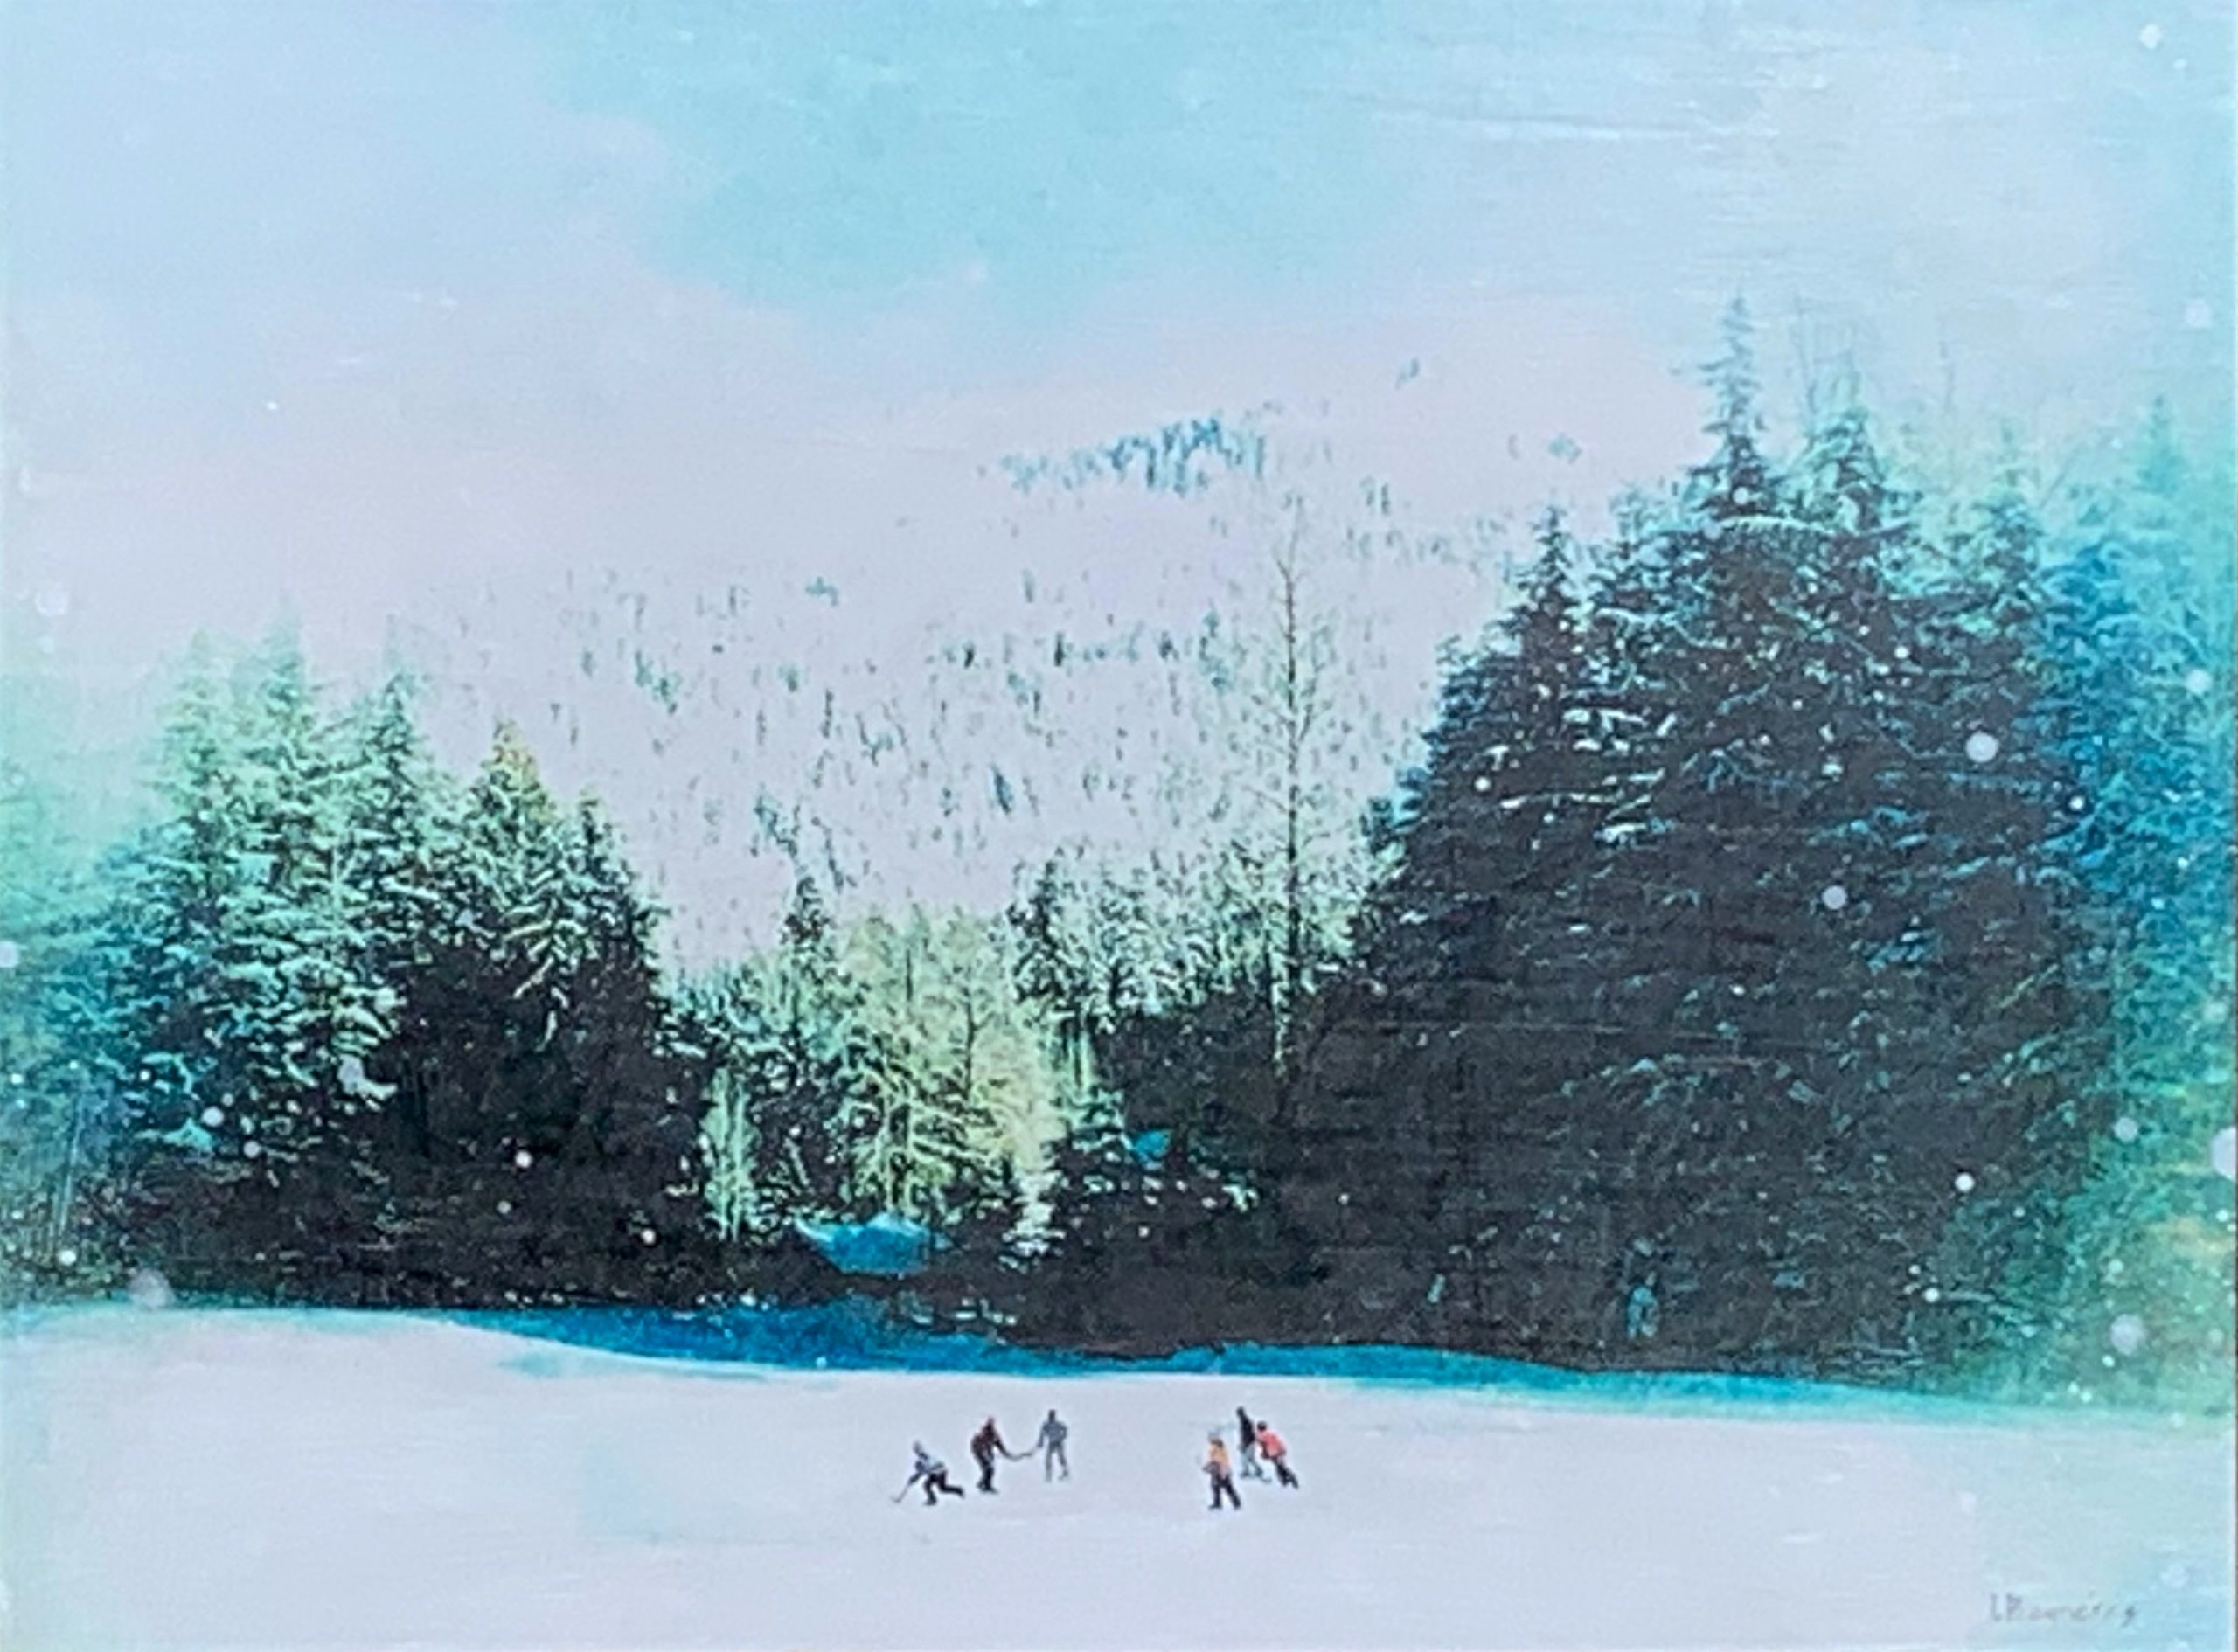 Home Ice Advantage, mixed media painting by Lori Bagneres | Effusion Art Gallery + Cast Glass Studio, Invermere BC